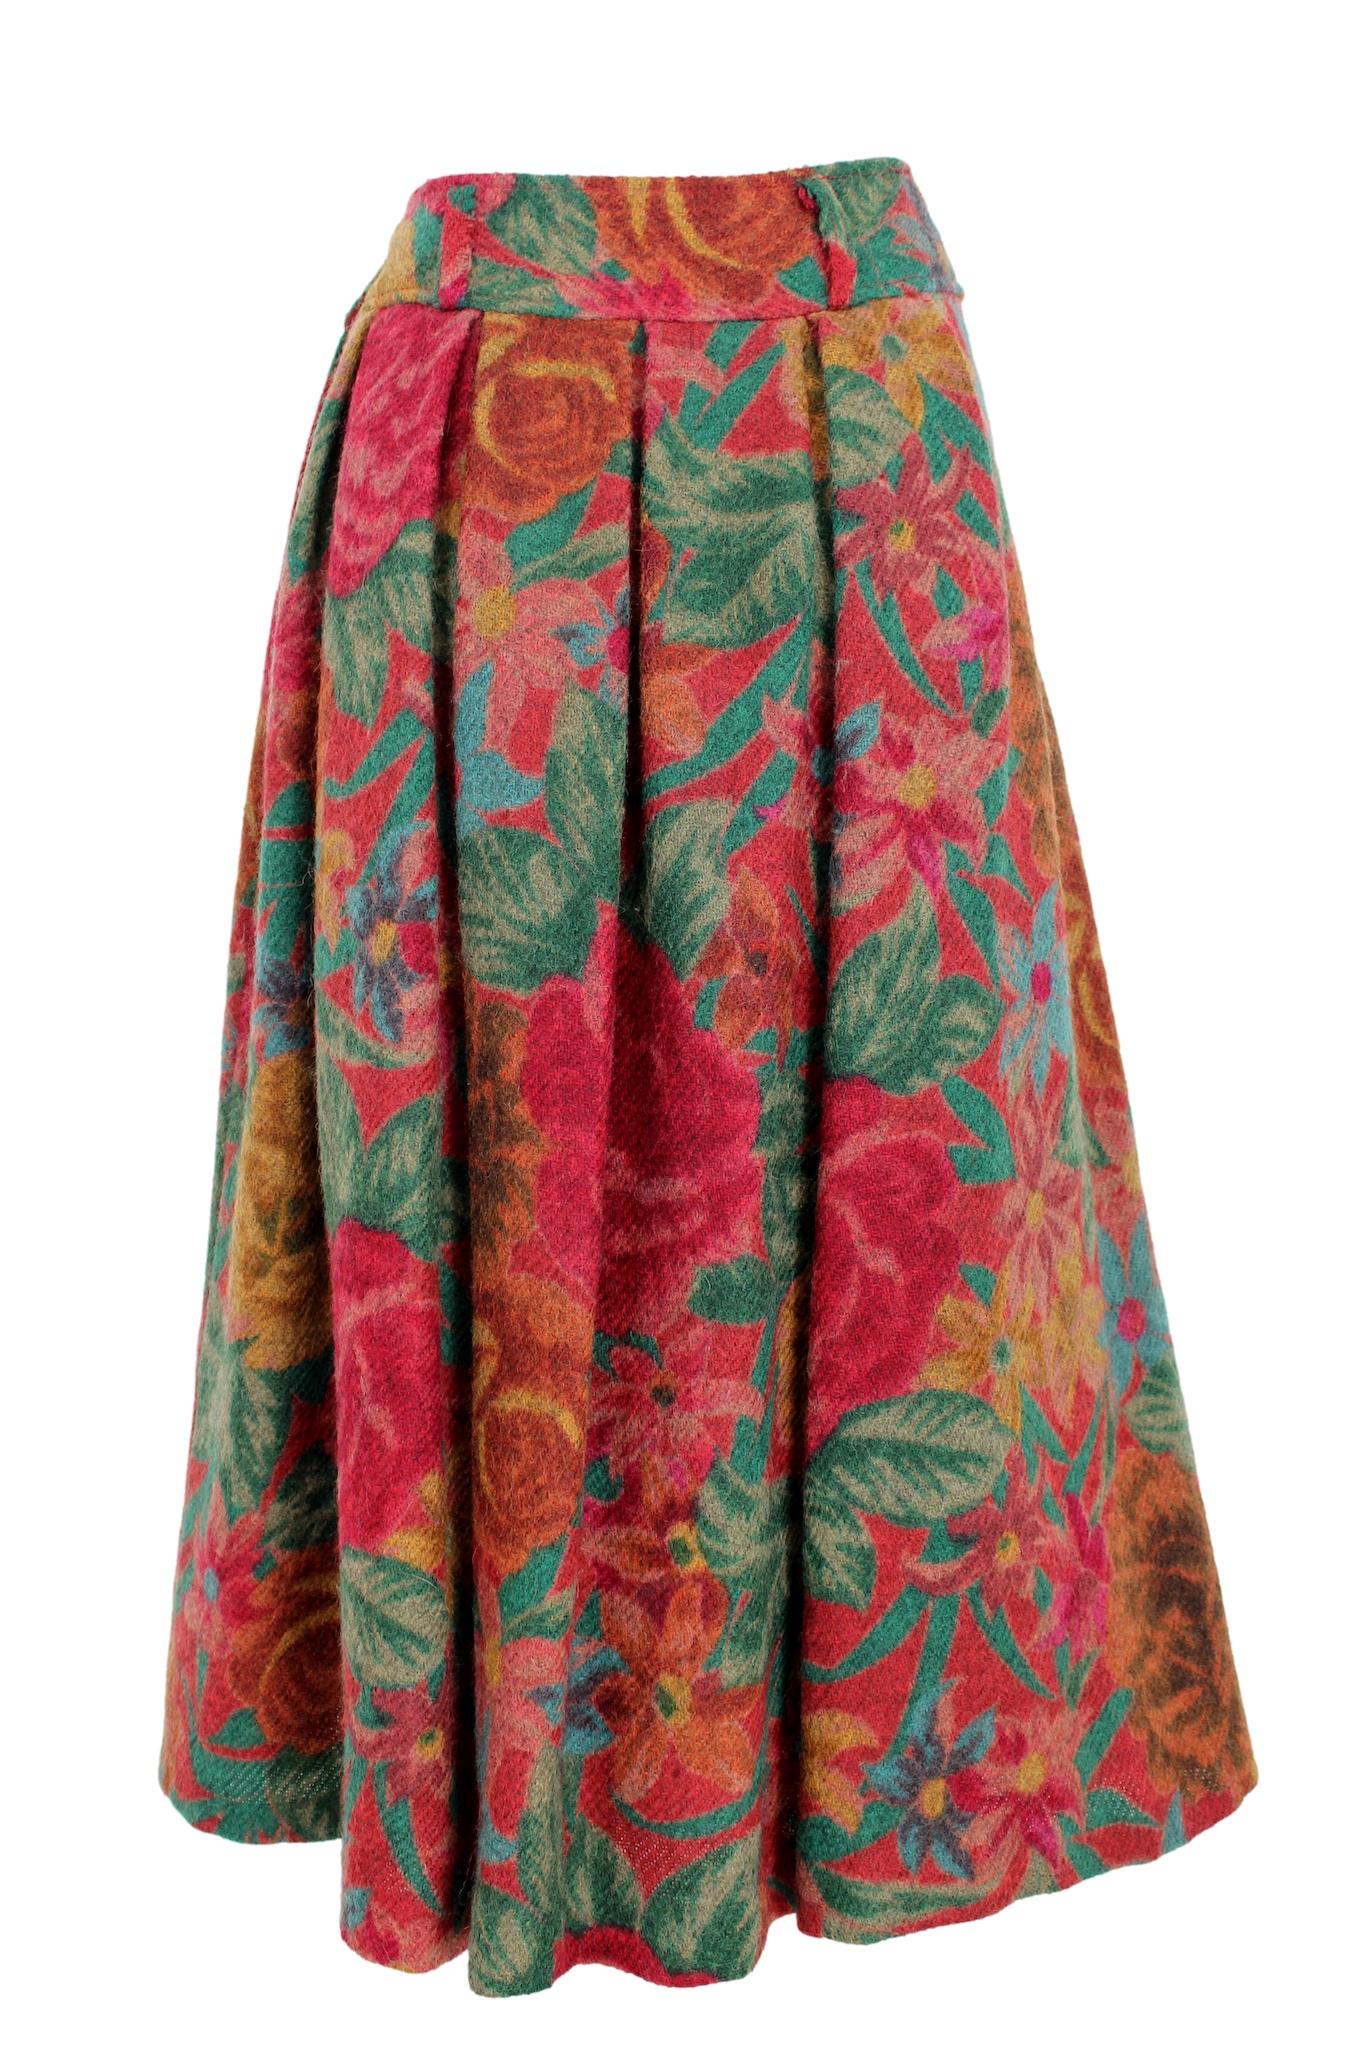 This Kenzo vintage 80s balloon skirt is a unique addition to any wardrobe. Made from high-quality wool, the skirt features a vibrant floral pattern in shades of red and green. The balloon silhouette adds a playful touch to the skirt. The vintage